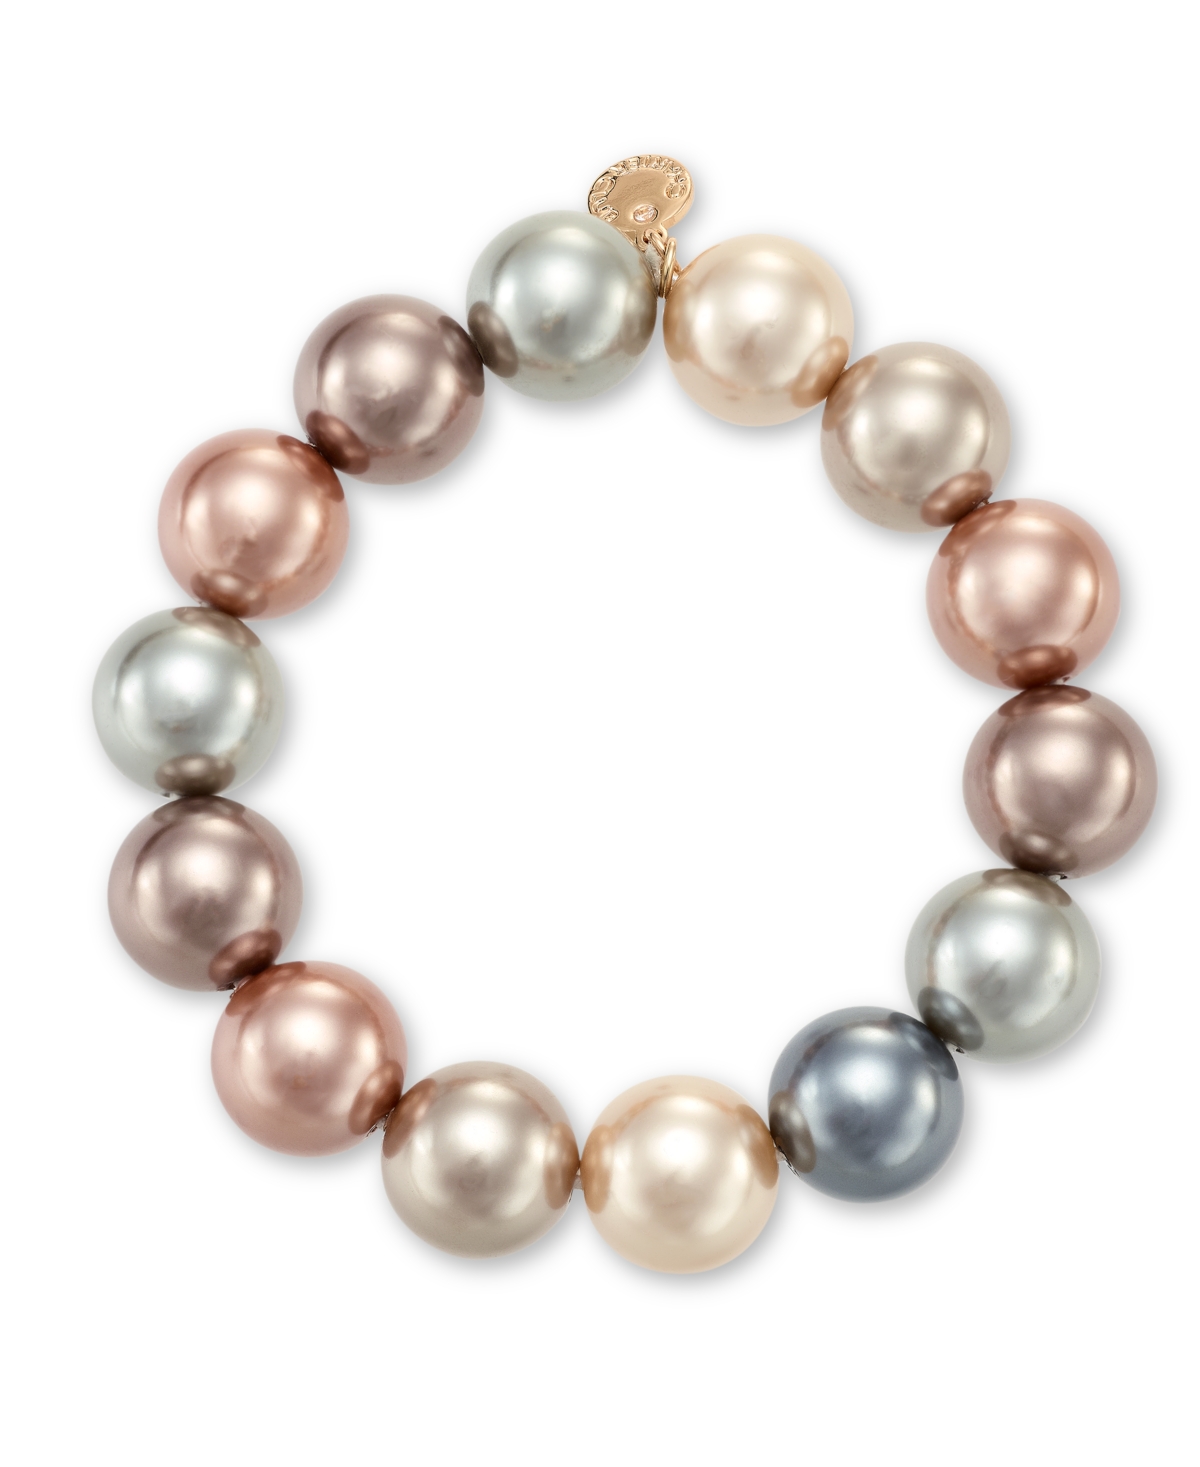 Gold-Tone Tonal Imitation Pearl Stretch Bracelet, Created for Macy's - Taupe